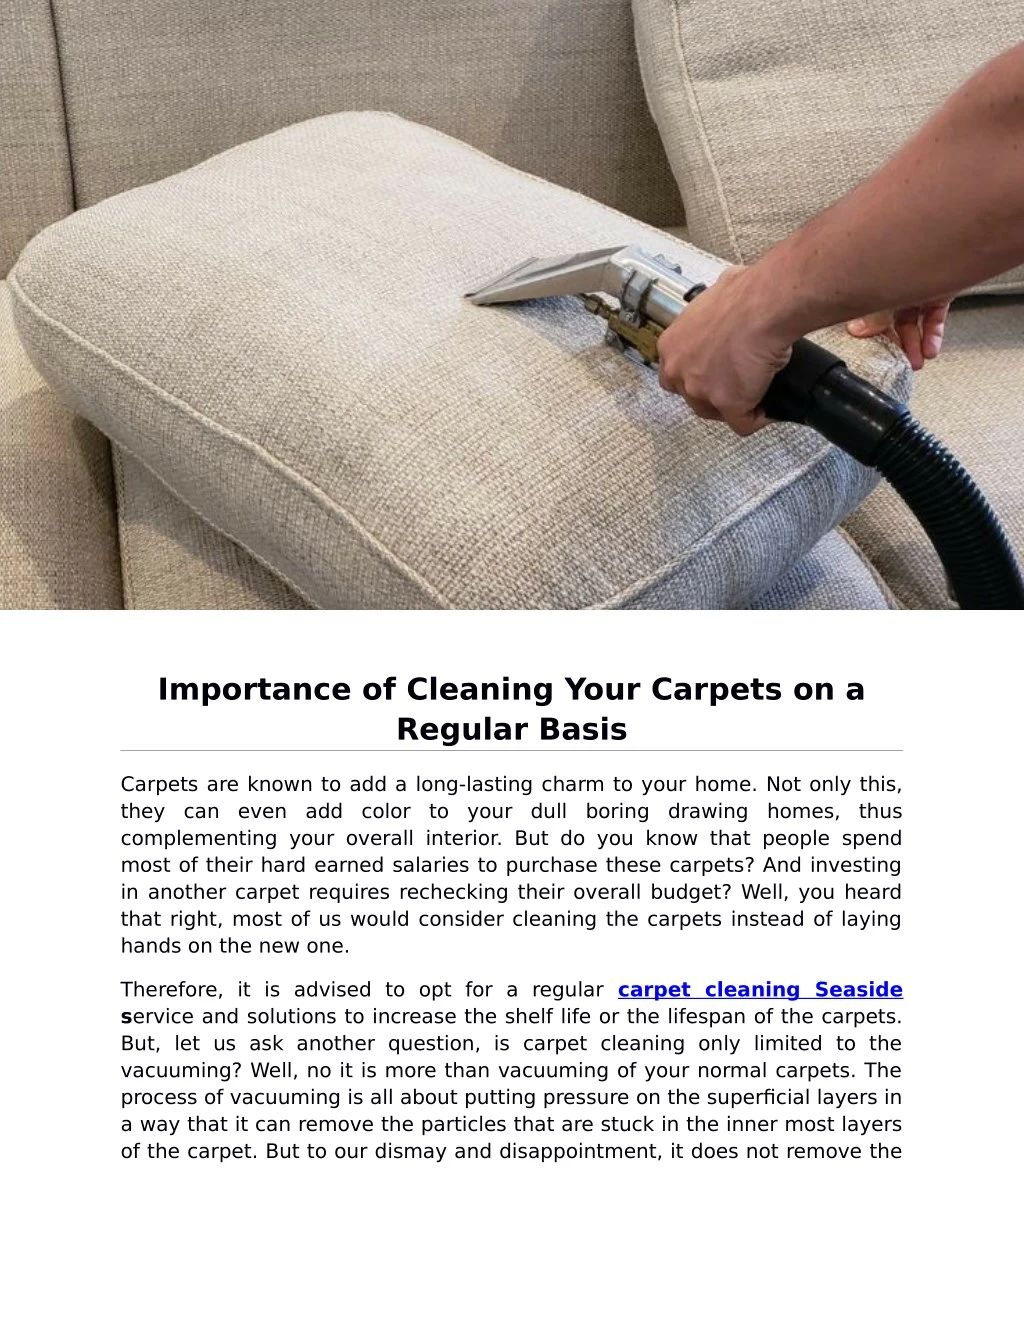 importance of cleaning your carpets on a regular